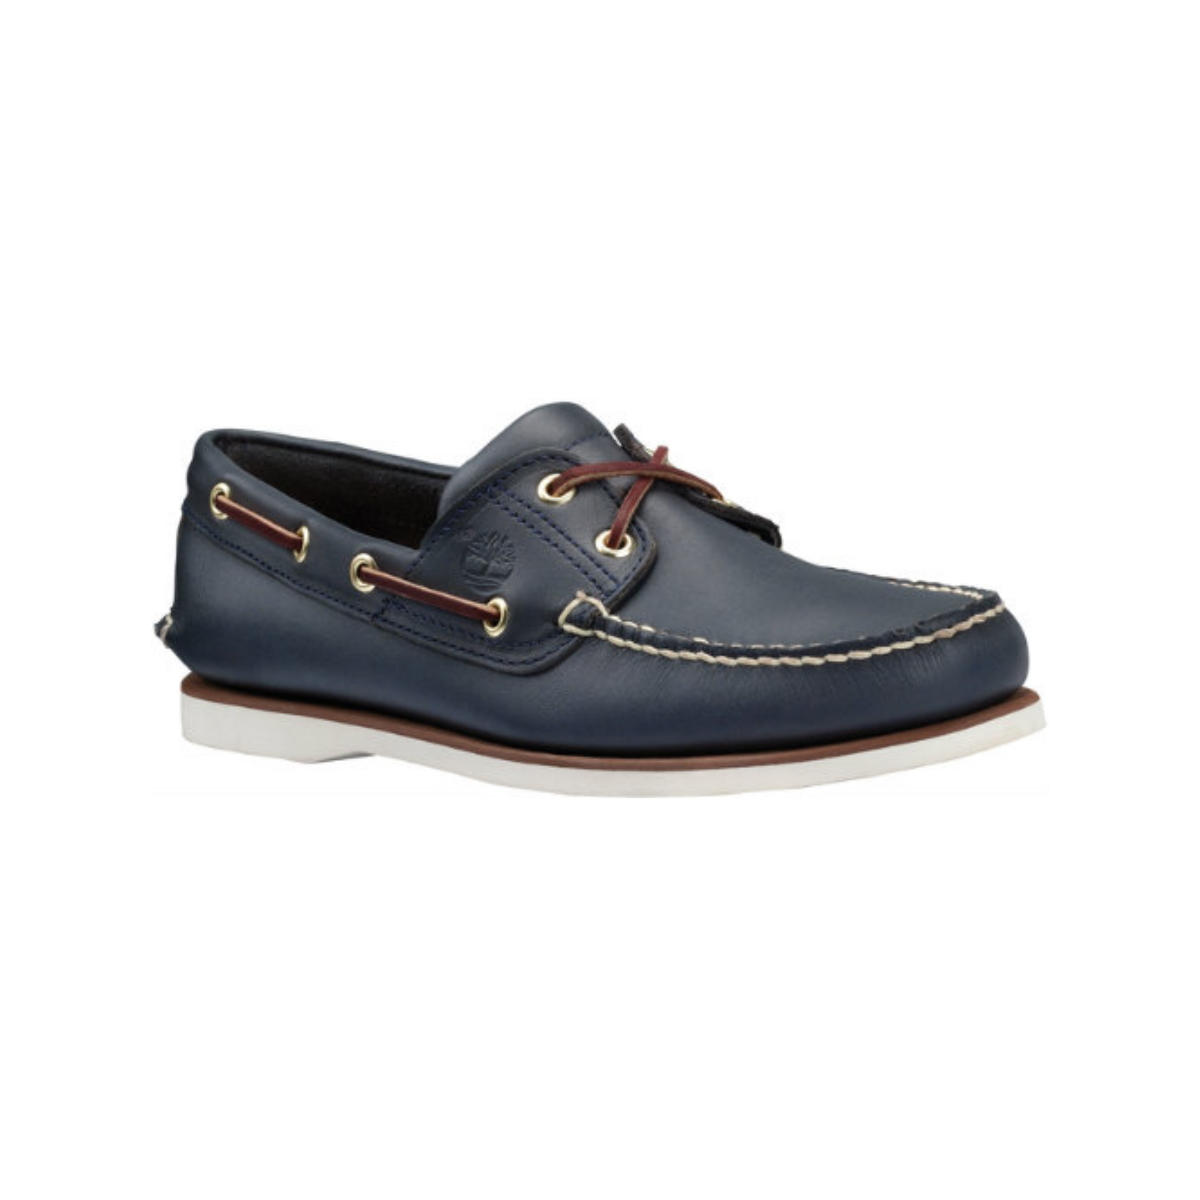 Timberland Classic Boat chaussures bateau homme navy eu 42 ( us 8,5 )